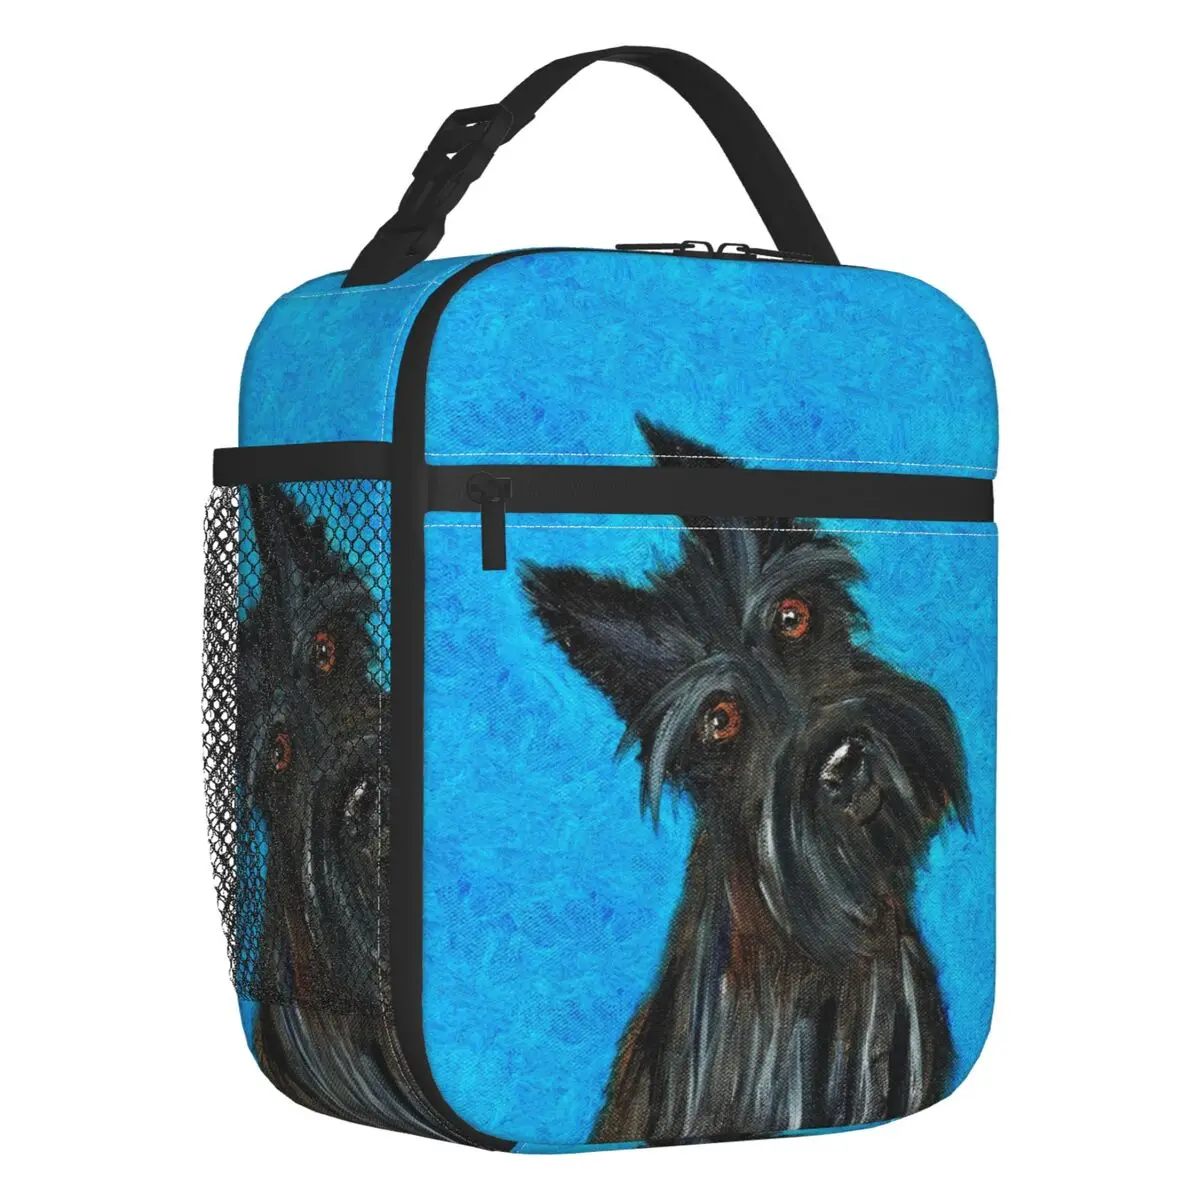 Happy Scottie Dog Thermal Insulated Lunch Bag Women Scottish Terrier Resuable Lunch Tote for Work School Travel Storage Food Box